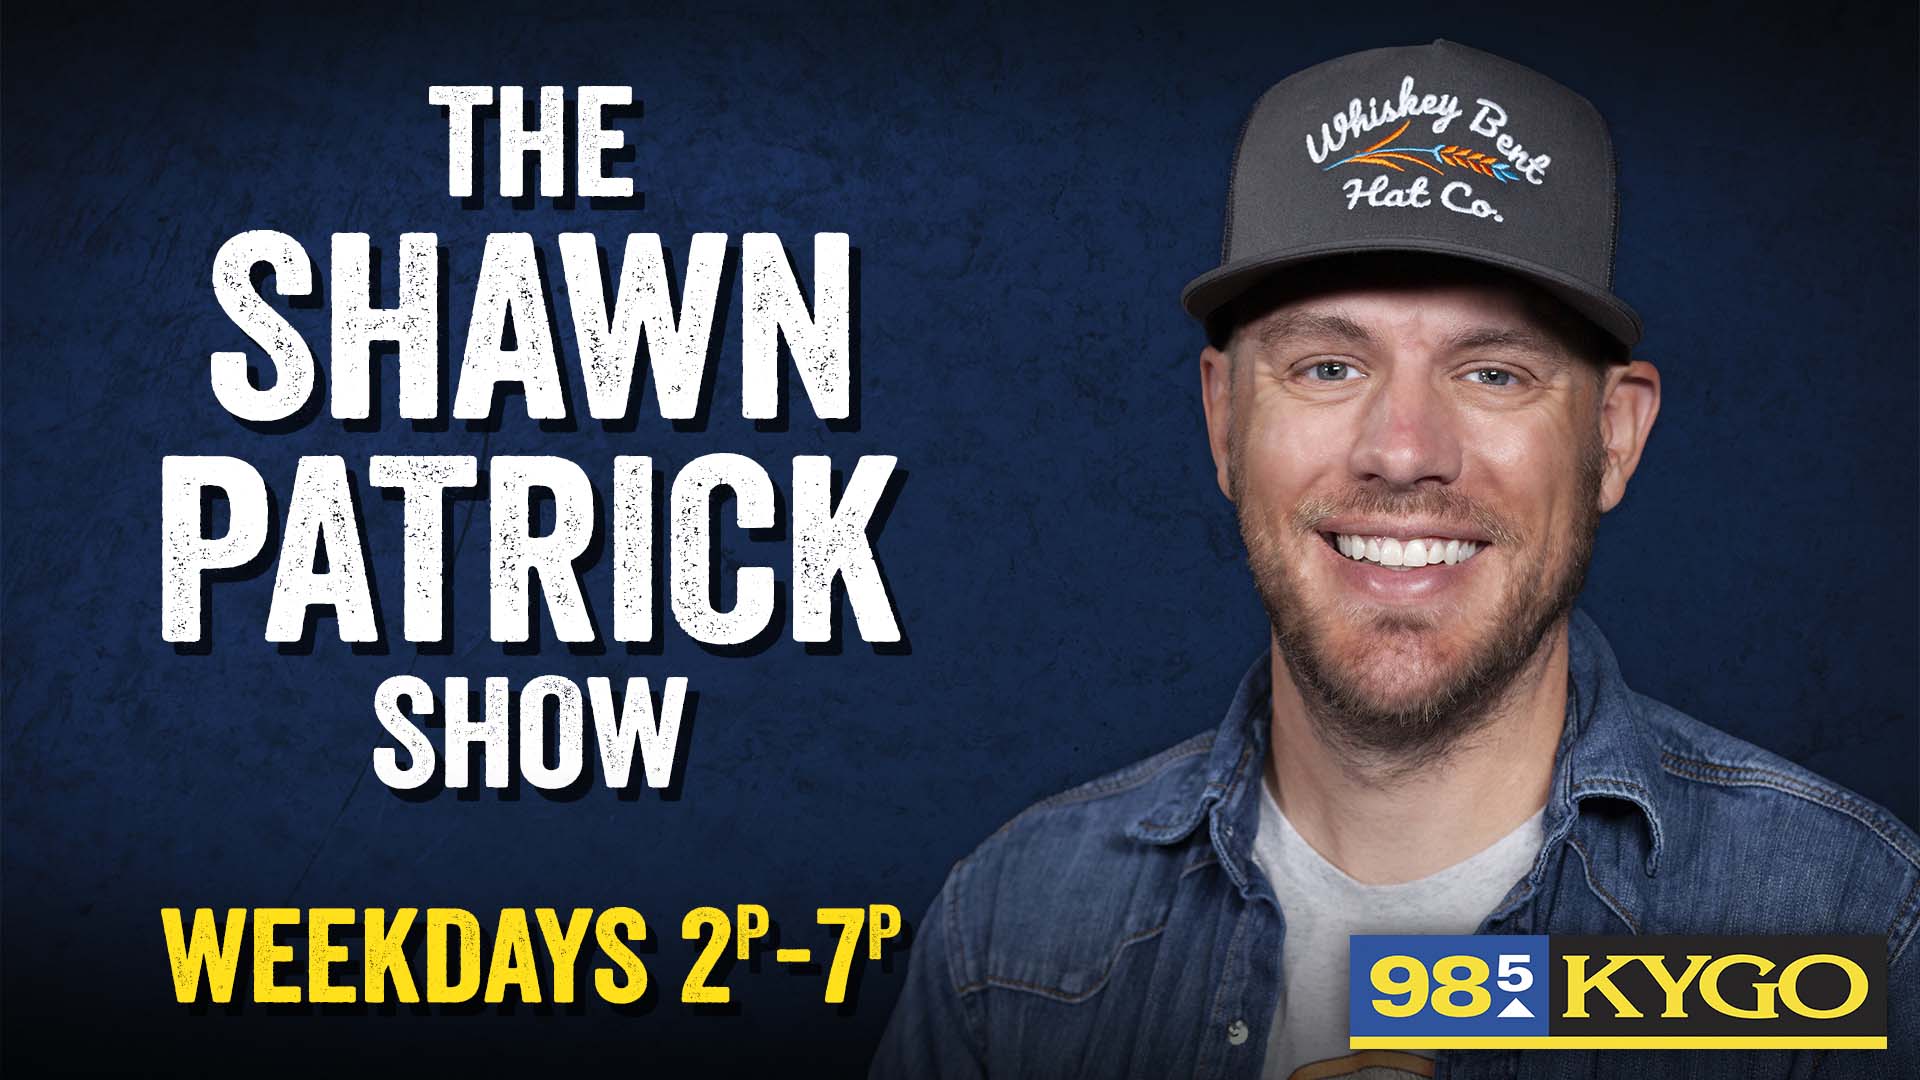 The Shawn Patrick Show...